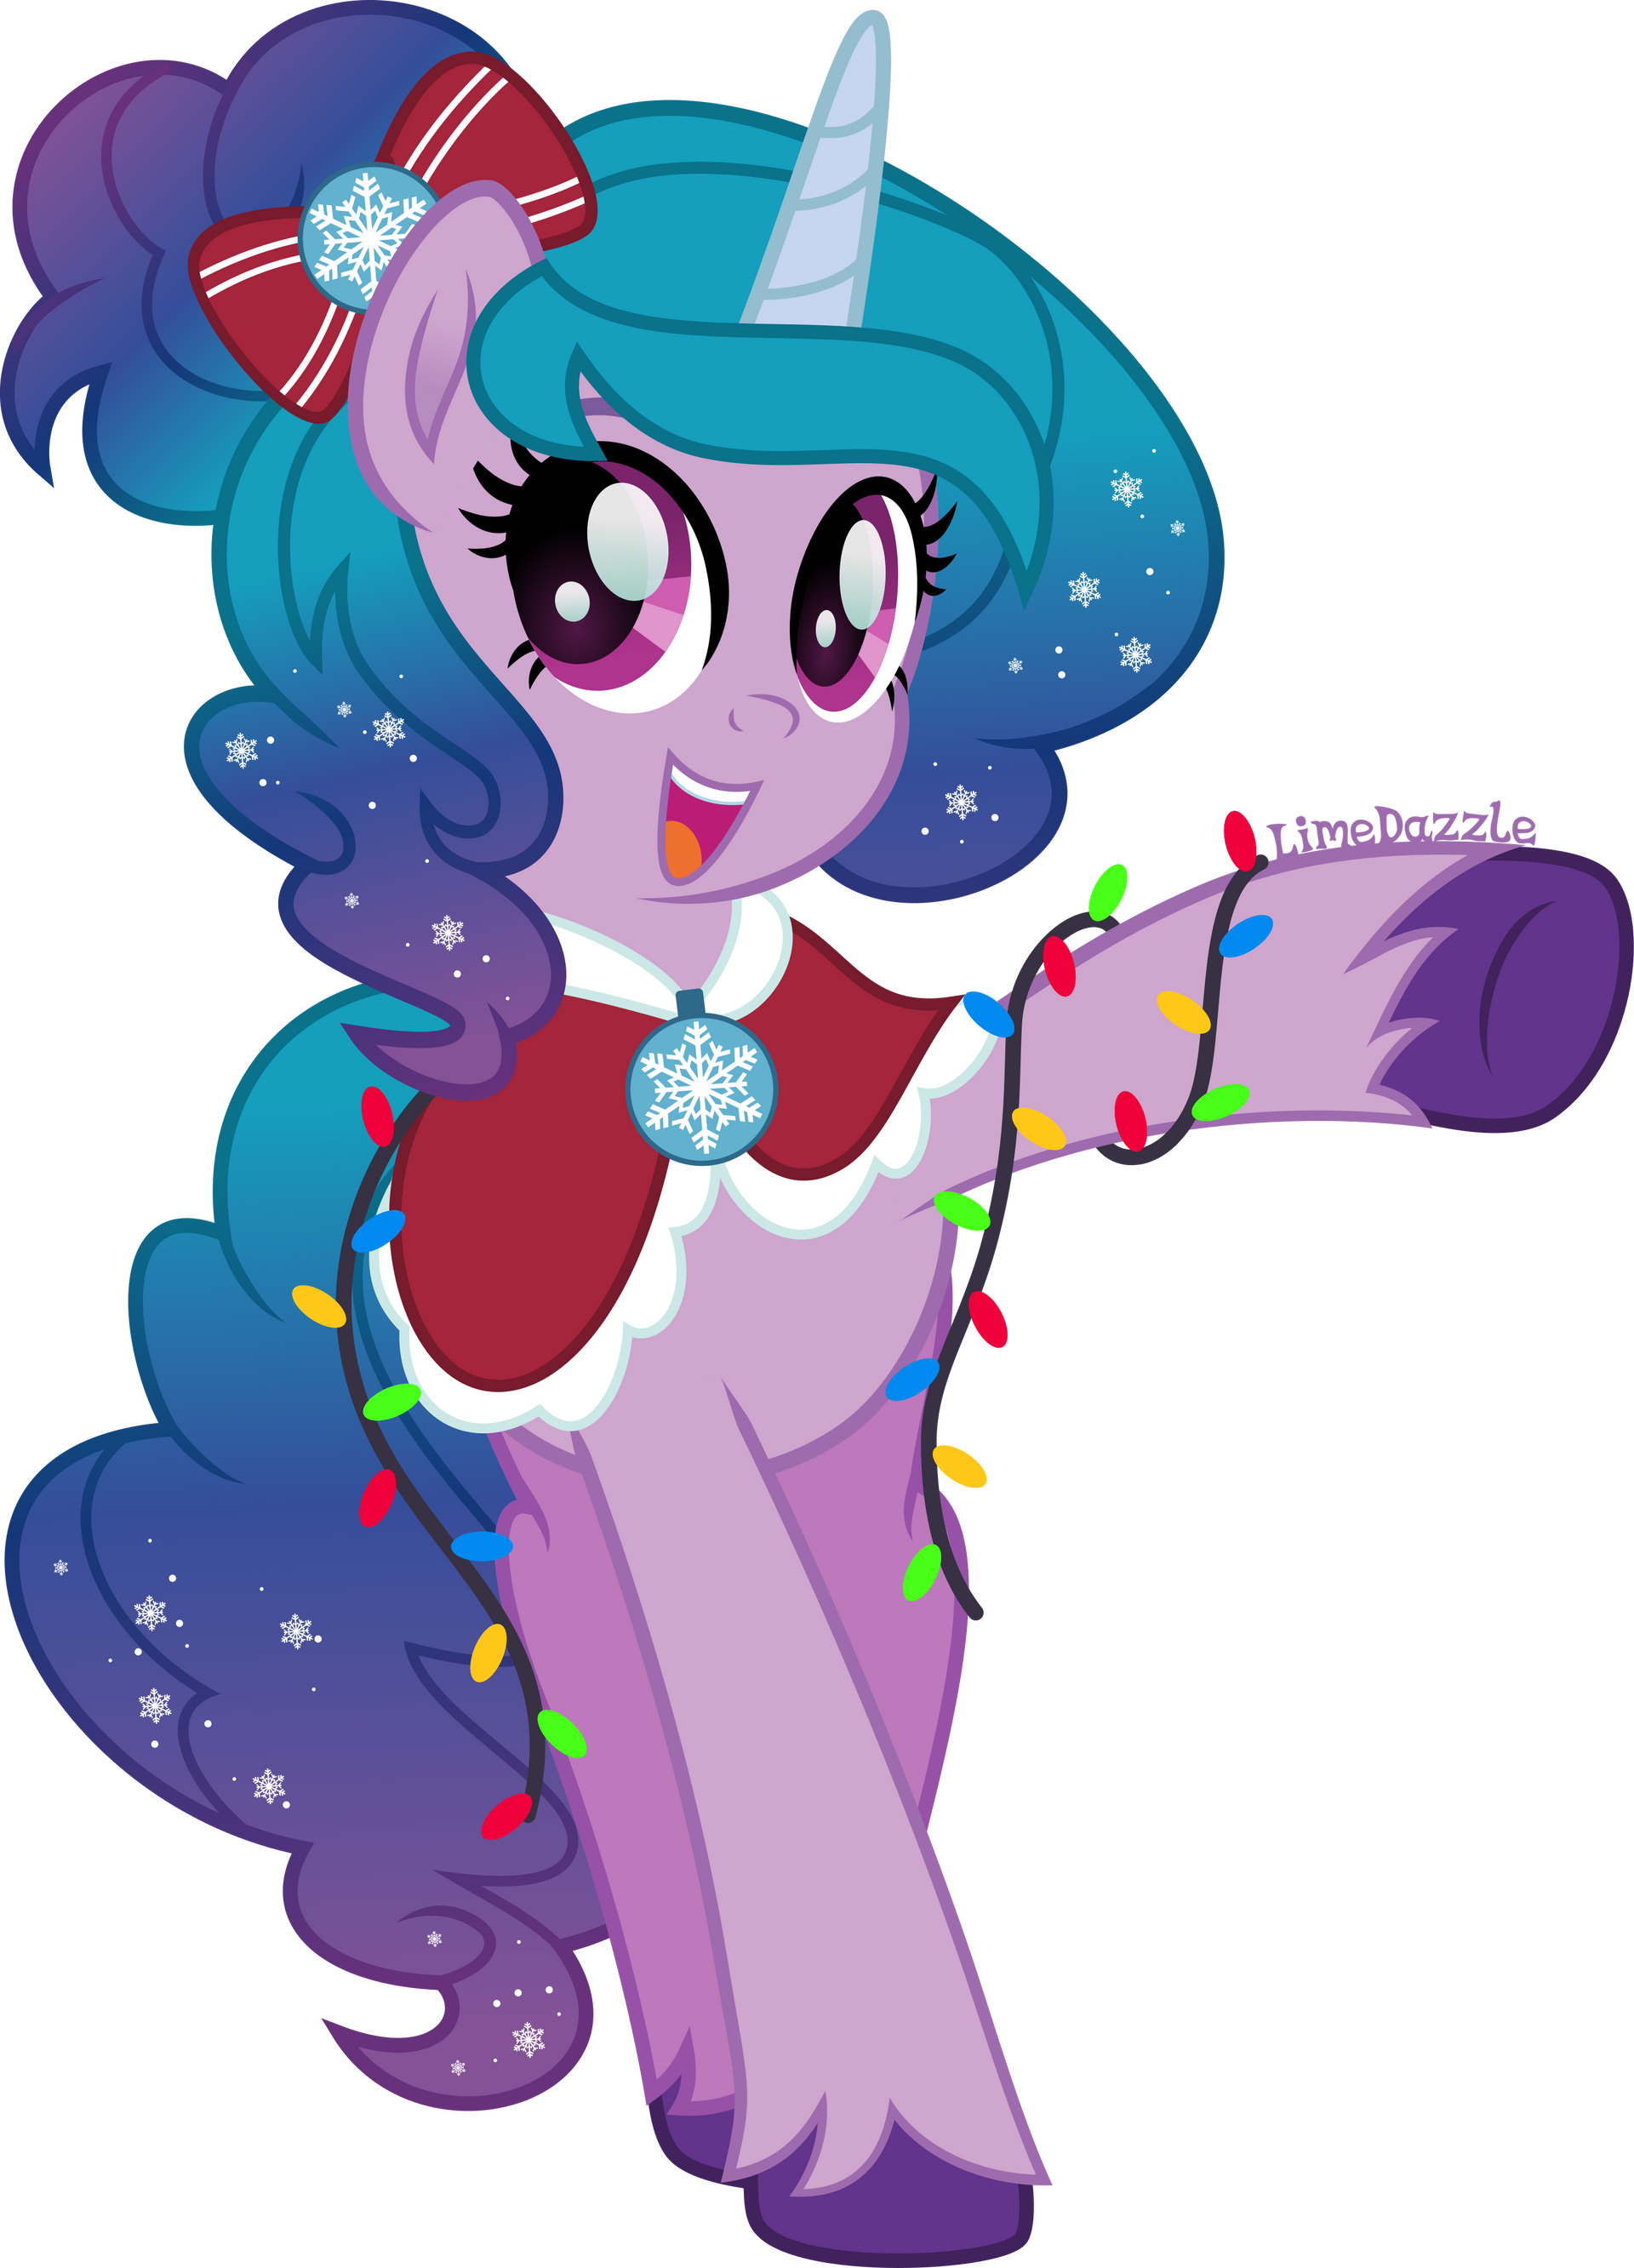 g5___holiday_izzy_by_limedazzle_dexqz43-fullview.png